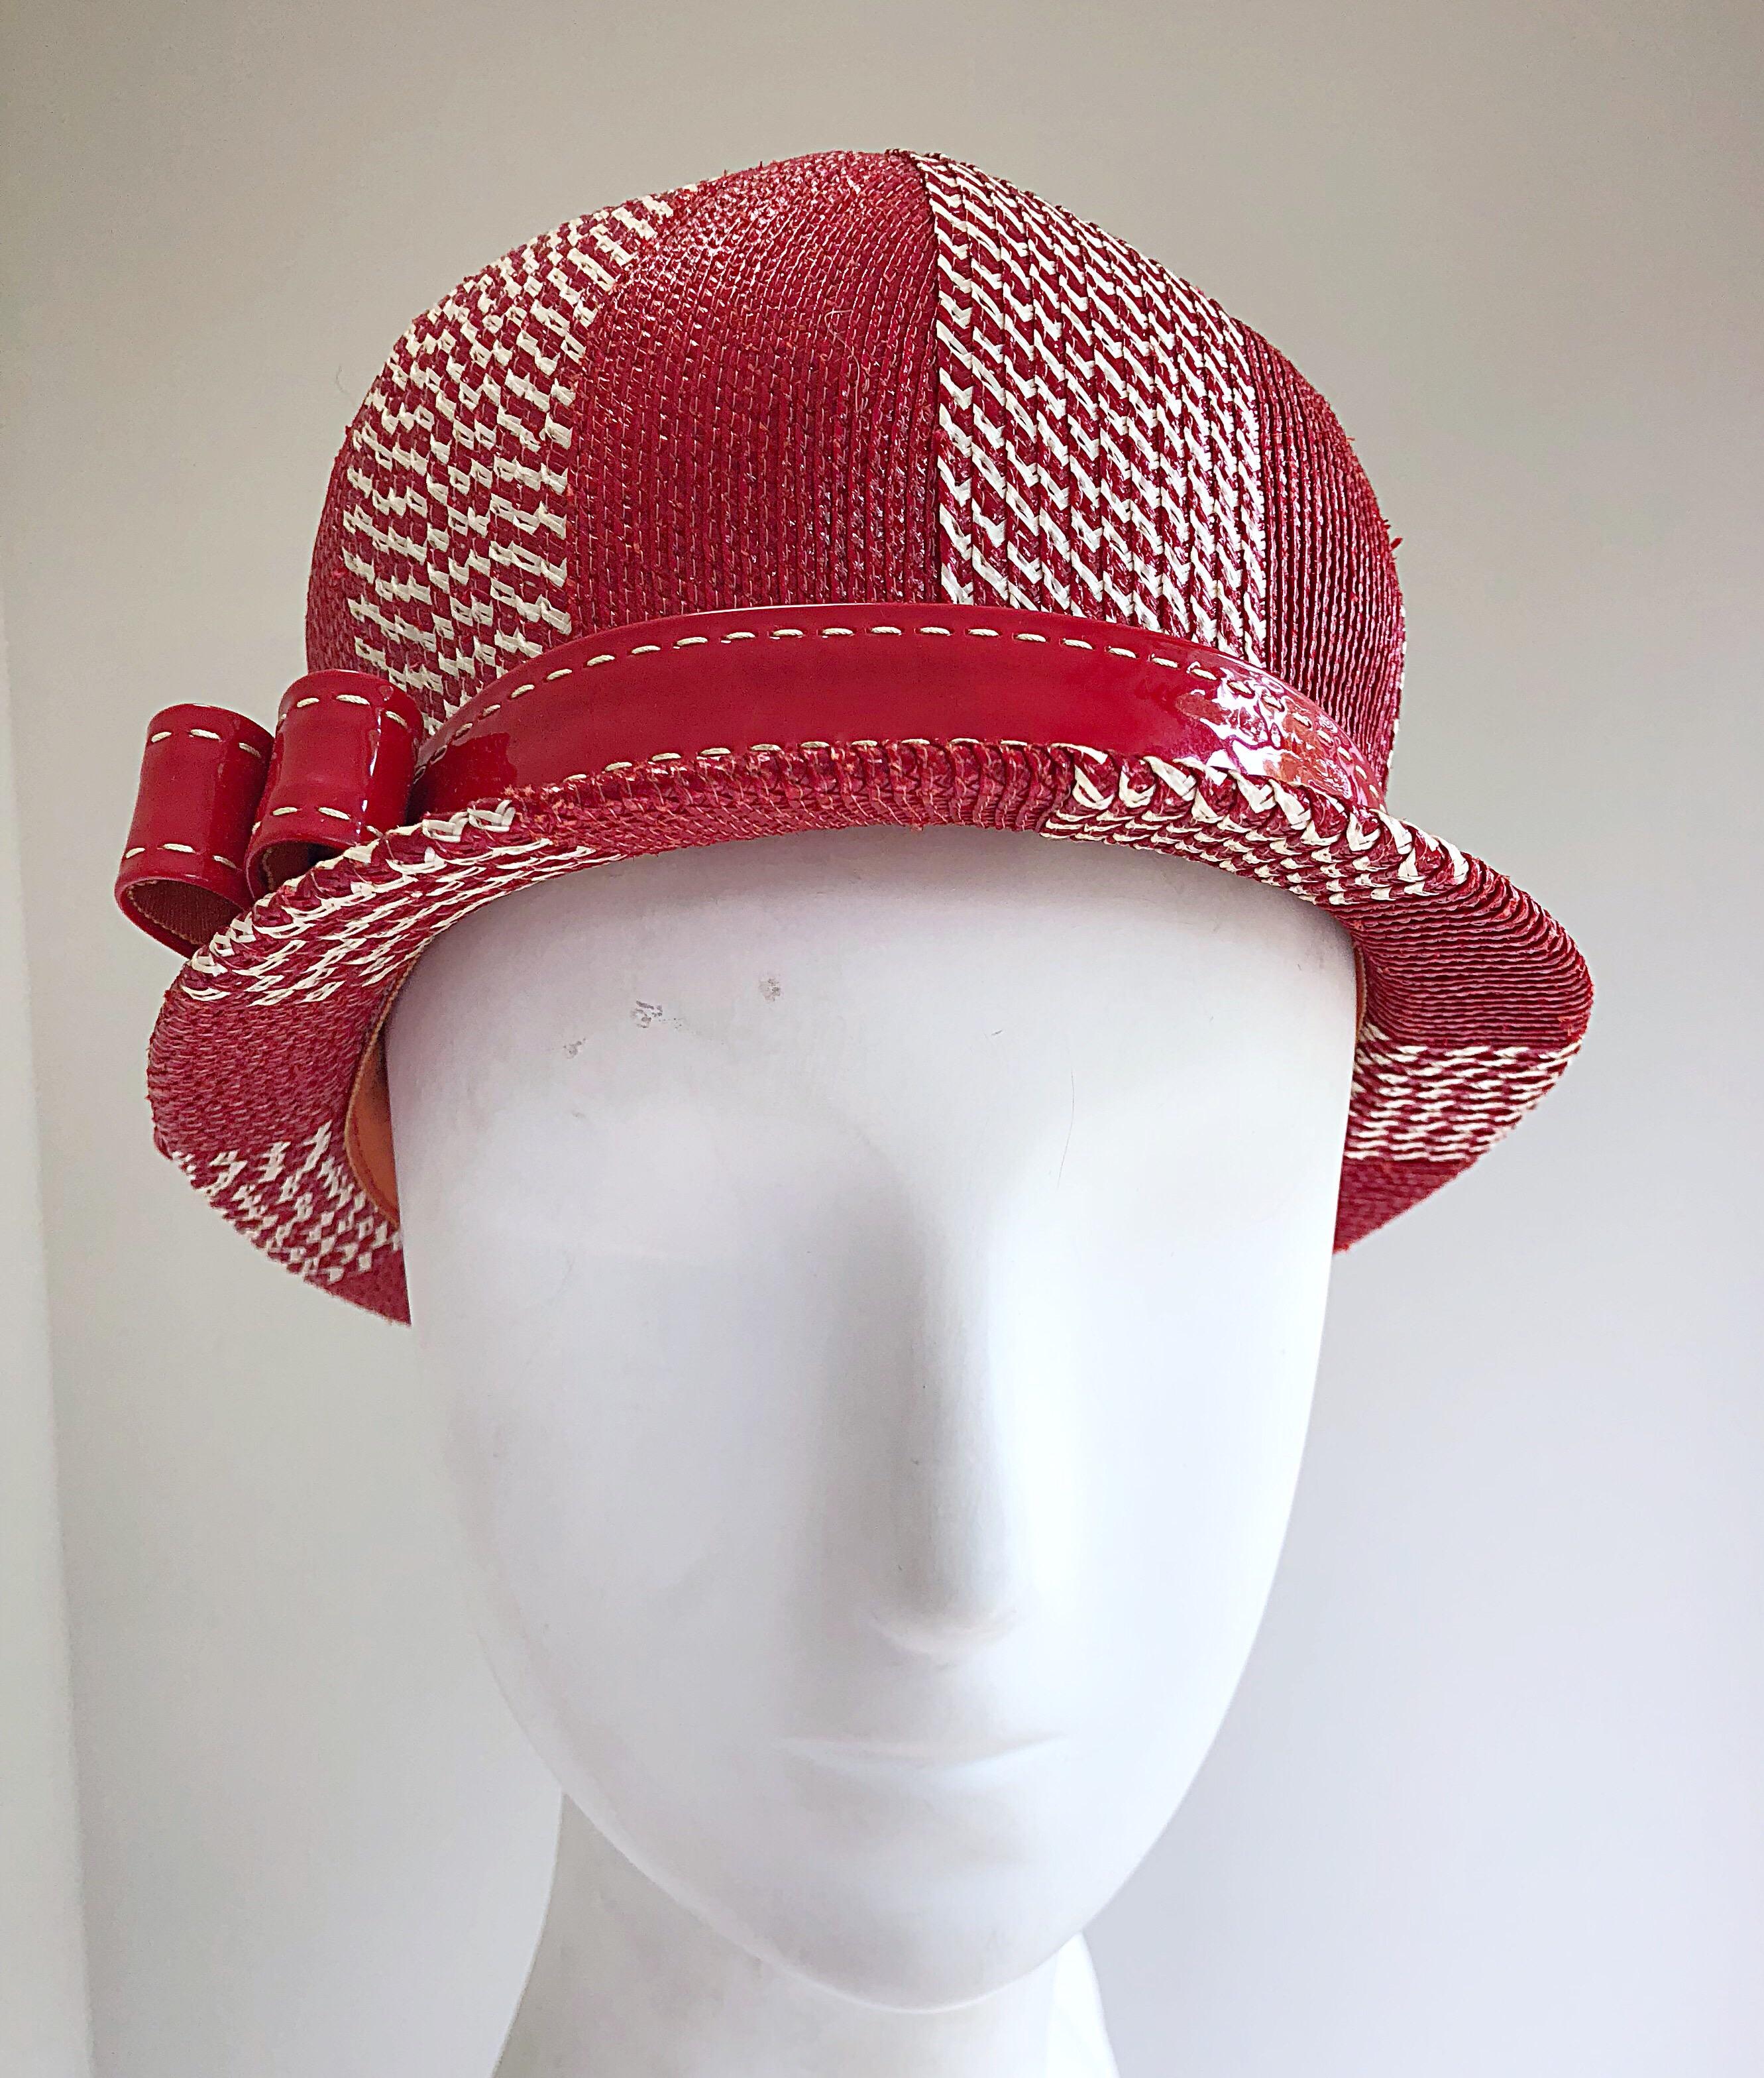 Gray Chic 1960s Adele Claire Red + White Waxed Wicker Patent 60s Vintage Cloche Hat